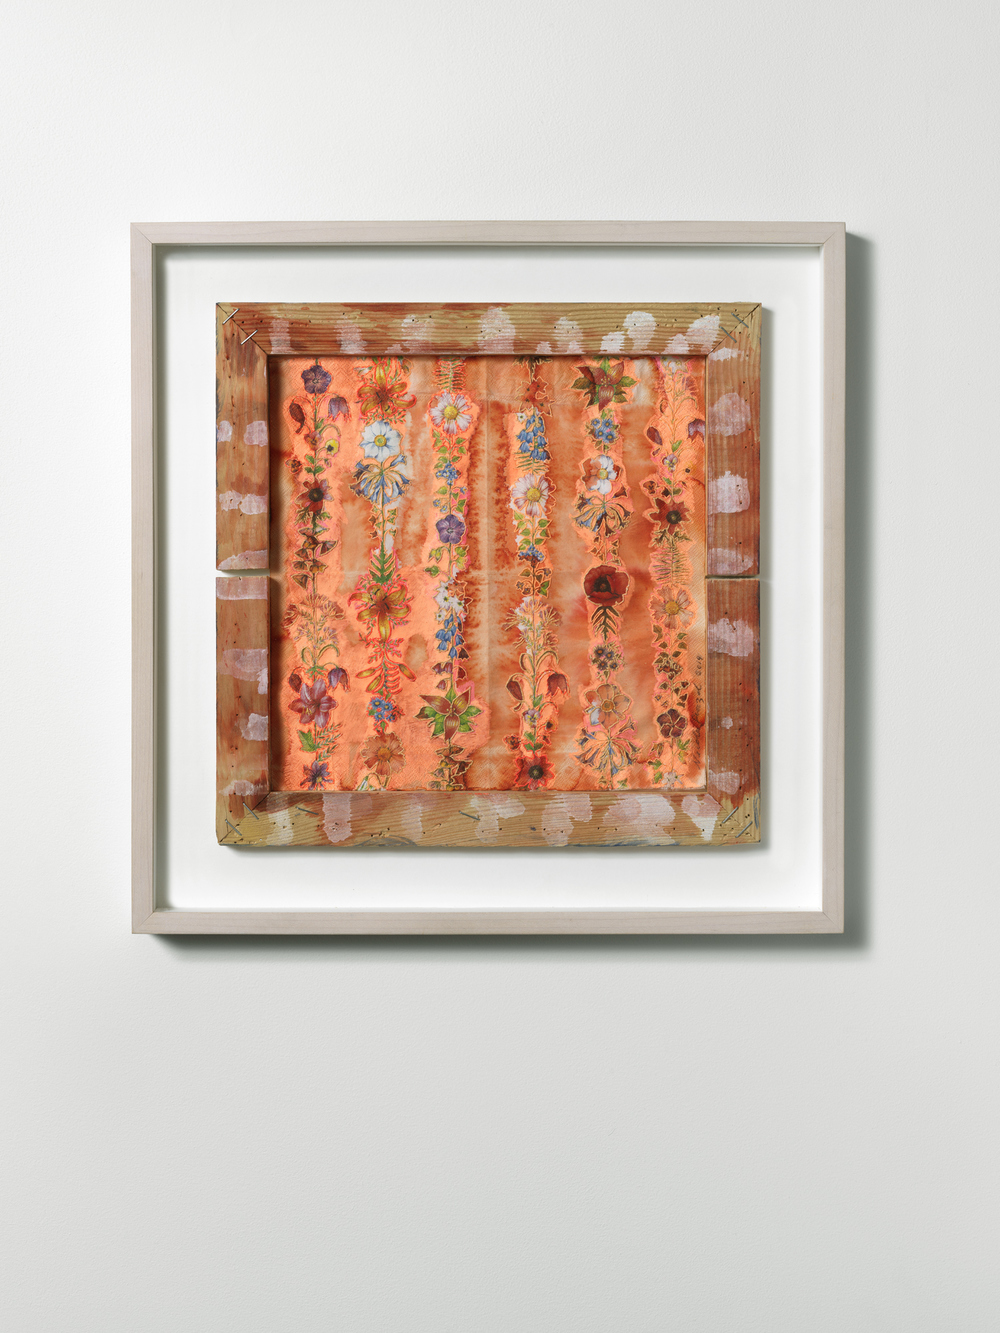 Nicola Ginzel  Selected Flatwork paper napkin with commercially printed flowers, embroidered by hand, ink, backed with BEVA archival adhesive, used wooden stretcher frame